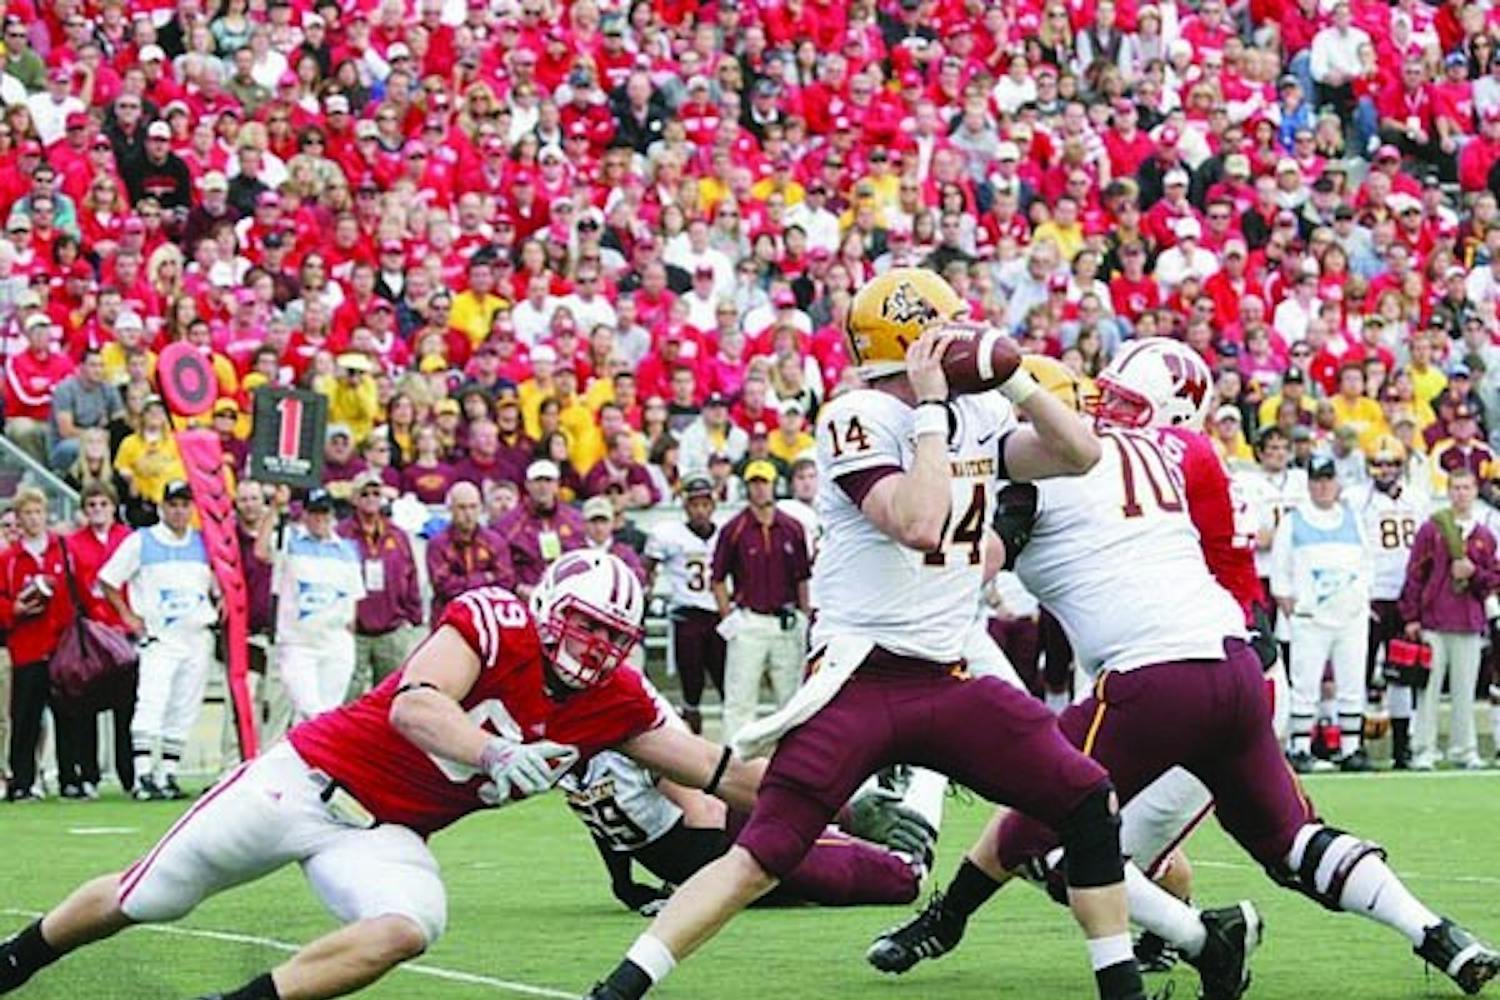 PERFECT POISE: Despite ASU's loss to Wisconsin on Saturday, redshirt junior quarterback Steven Threet displayed composure and leadership. Threet finished 21-of-33 passing for 211 yards and no interceptions. (Photo by Norm Ritland)